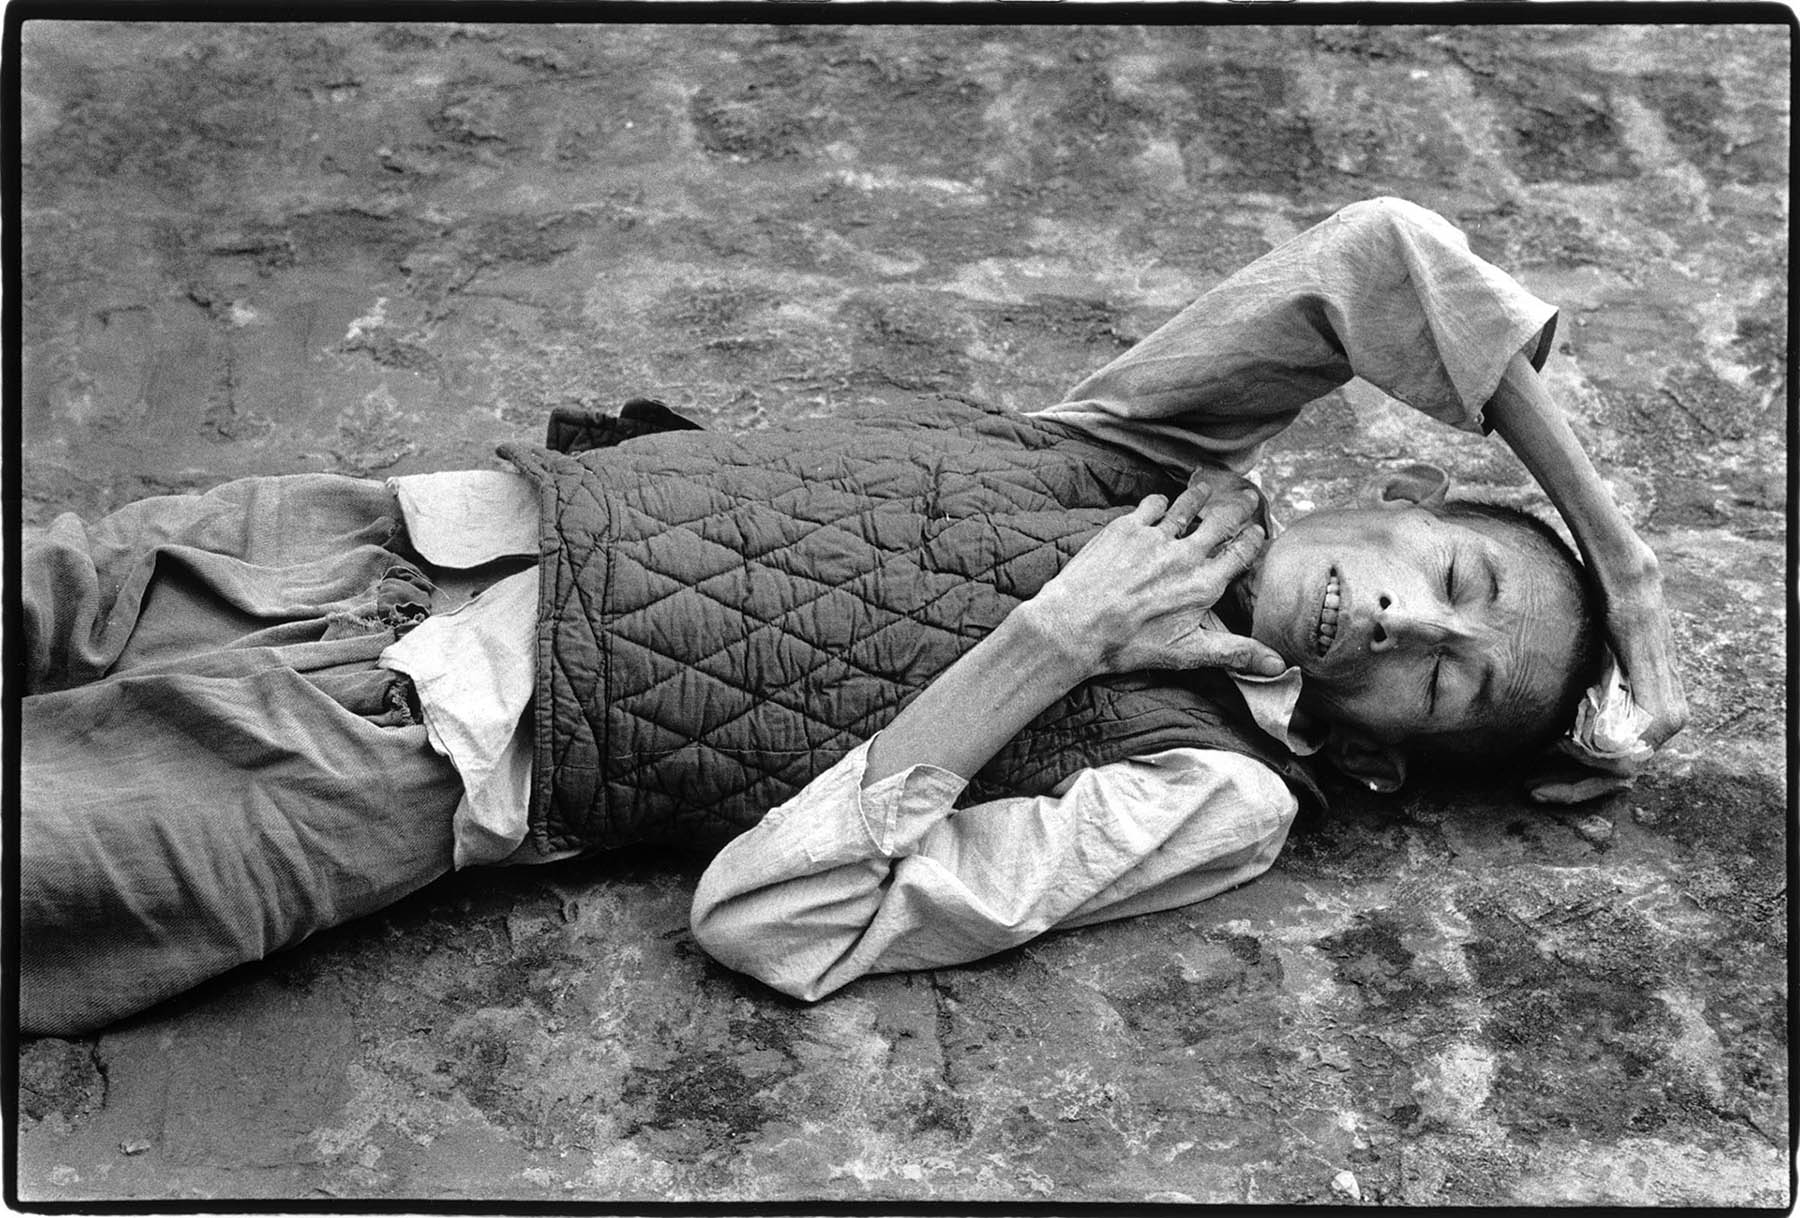 Vietnam, psychiatry and war.  Patient - a traumatized former soldier - at the "Center for Mental Treatment" in Ba Vi town. Part of the patients are suffering from war traumas.